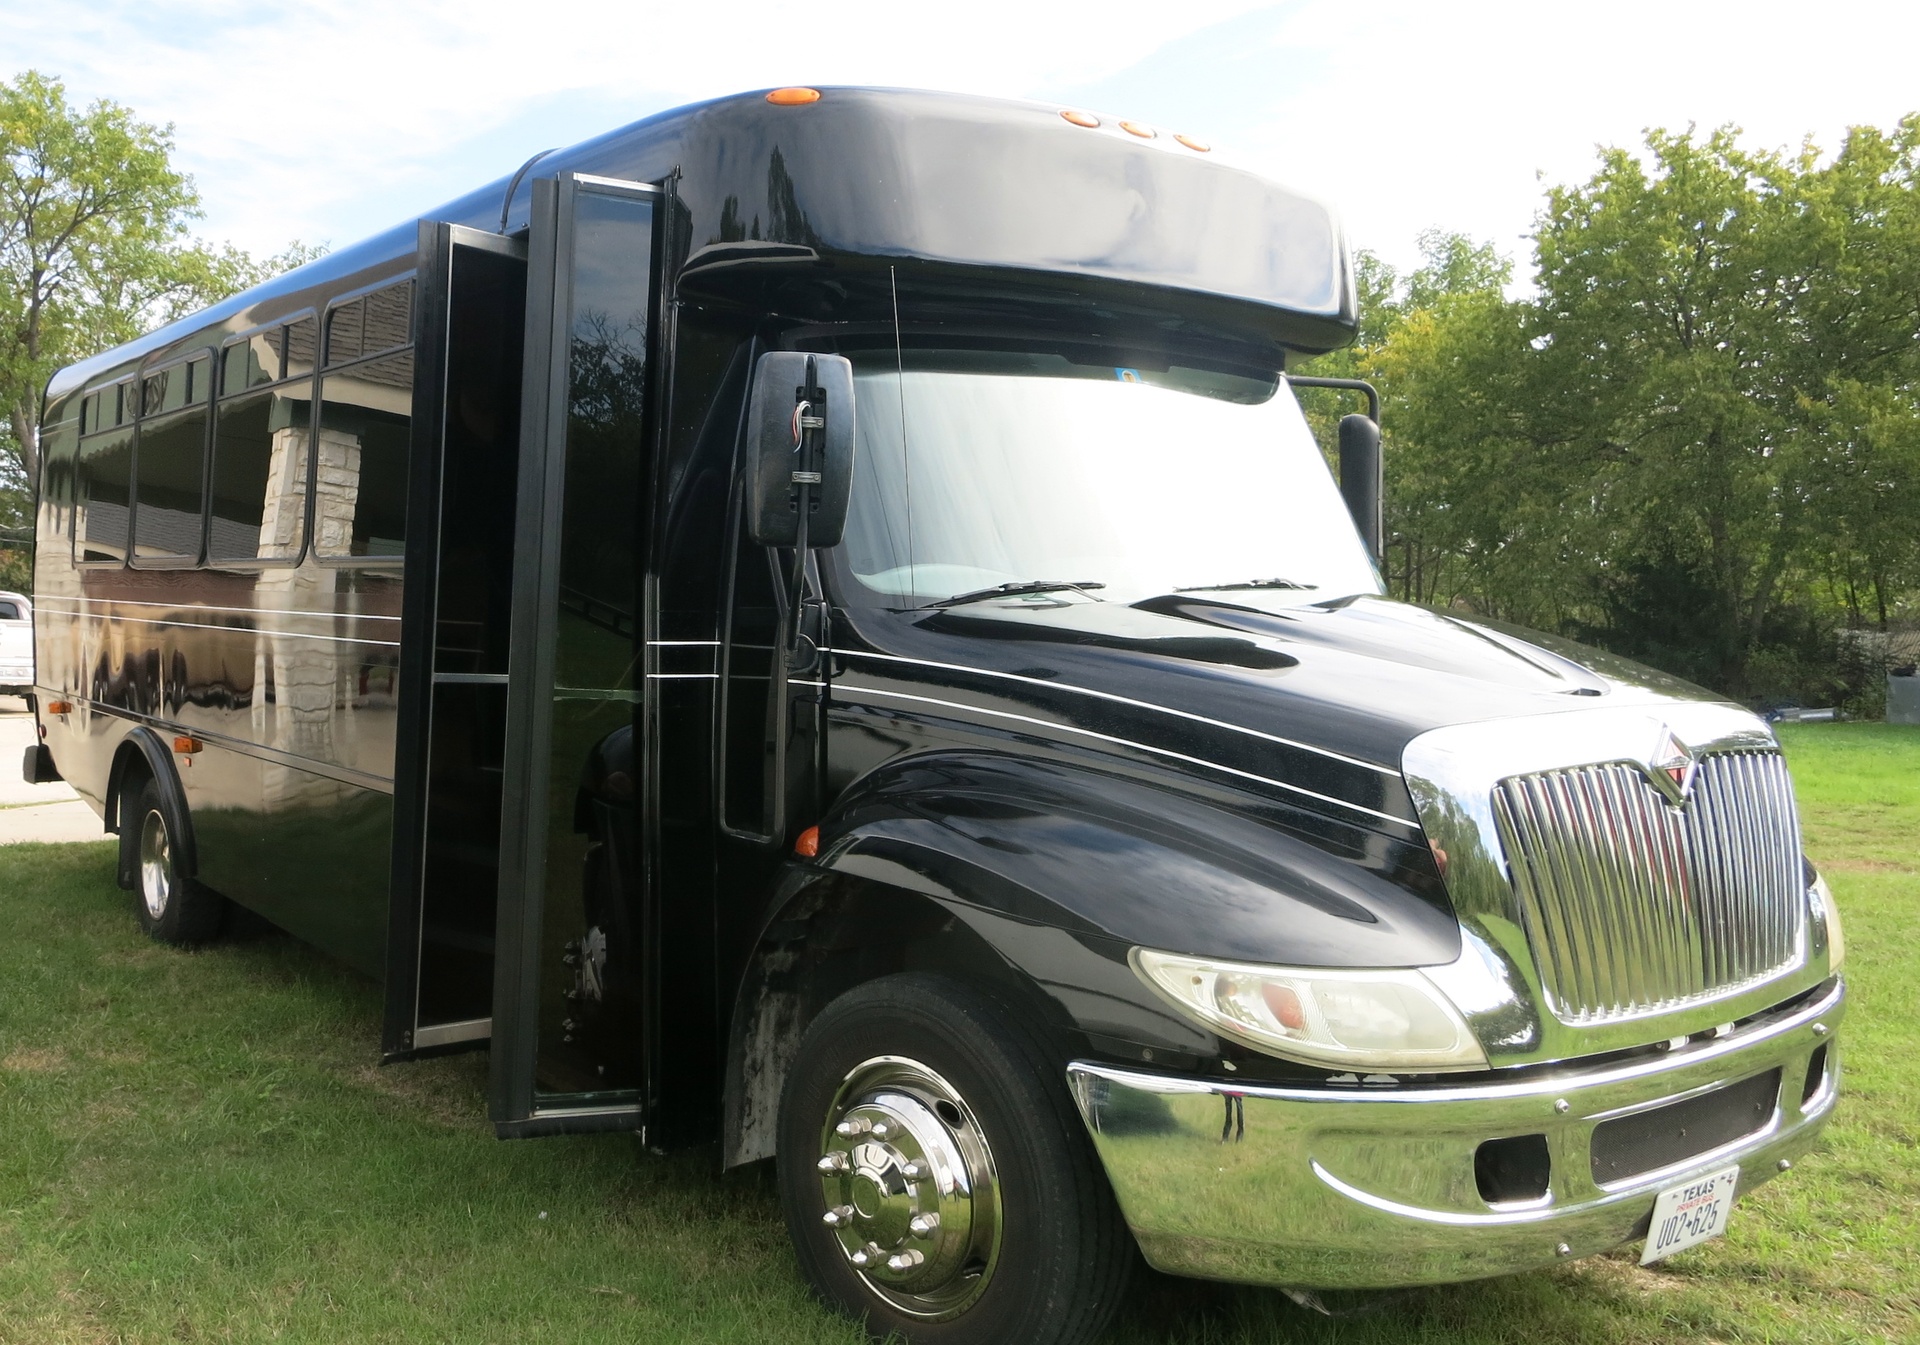 Kingwood Party bus rental services and limo services